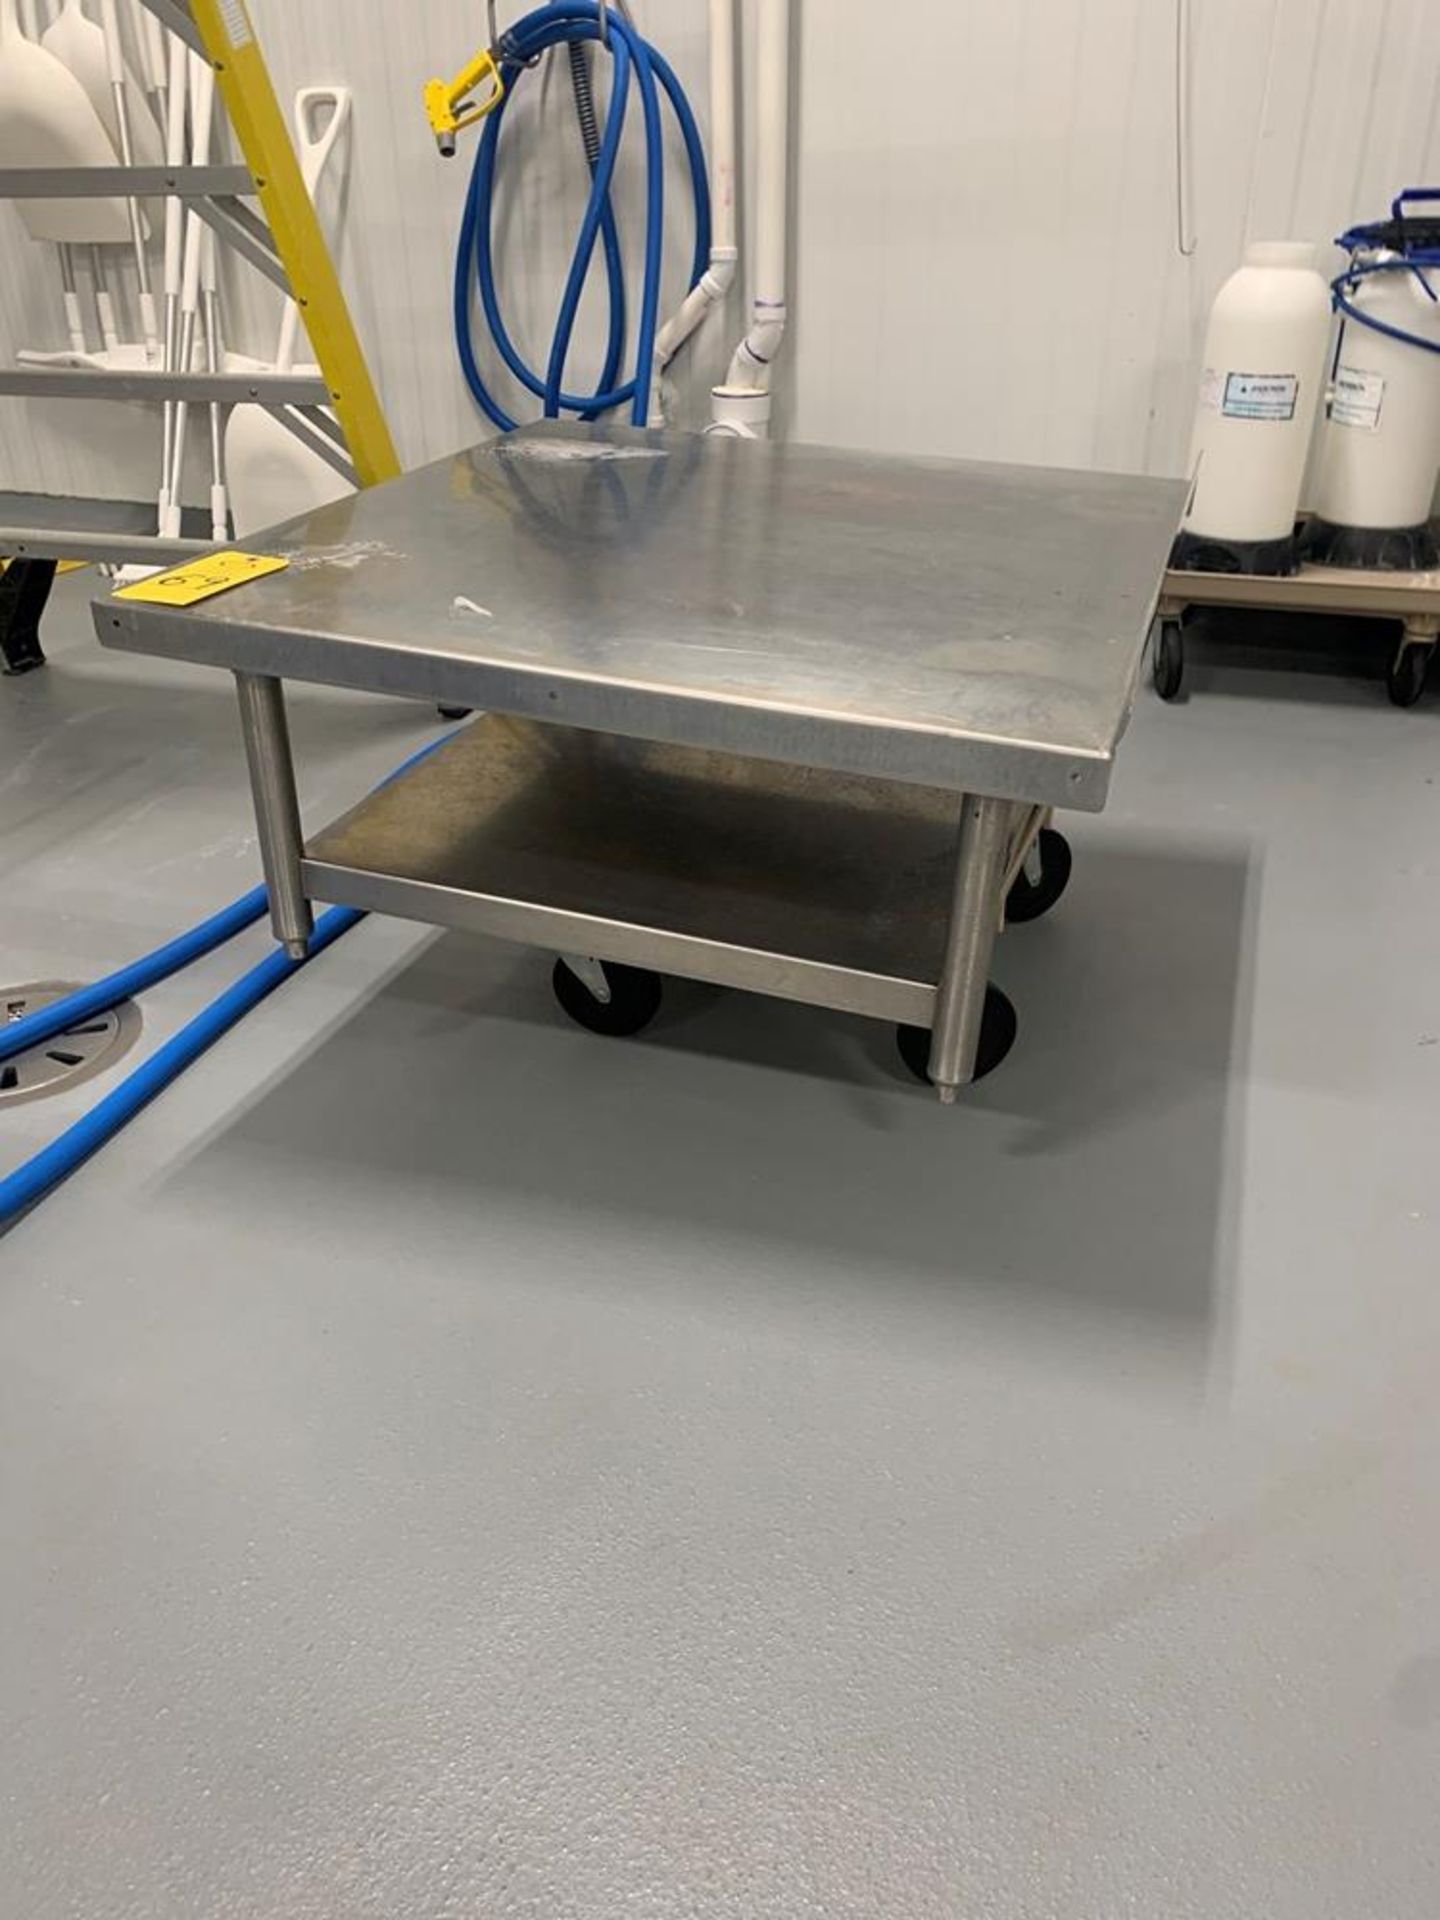 Stainless Steel Equipment Table with bottom shelf, 35" X 36" X 18" - Image 2 of 3